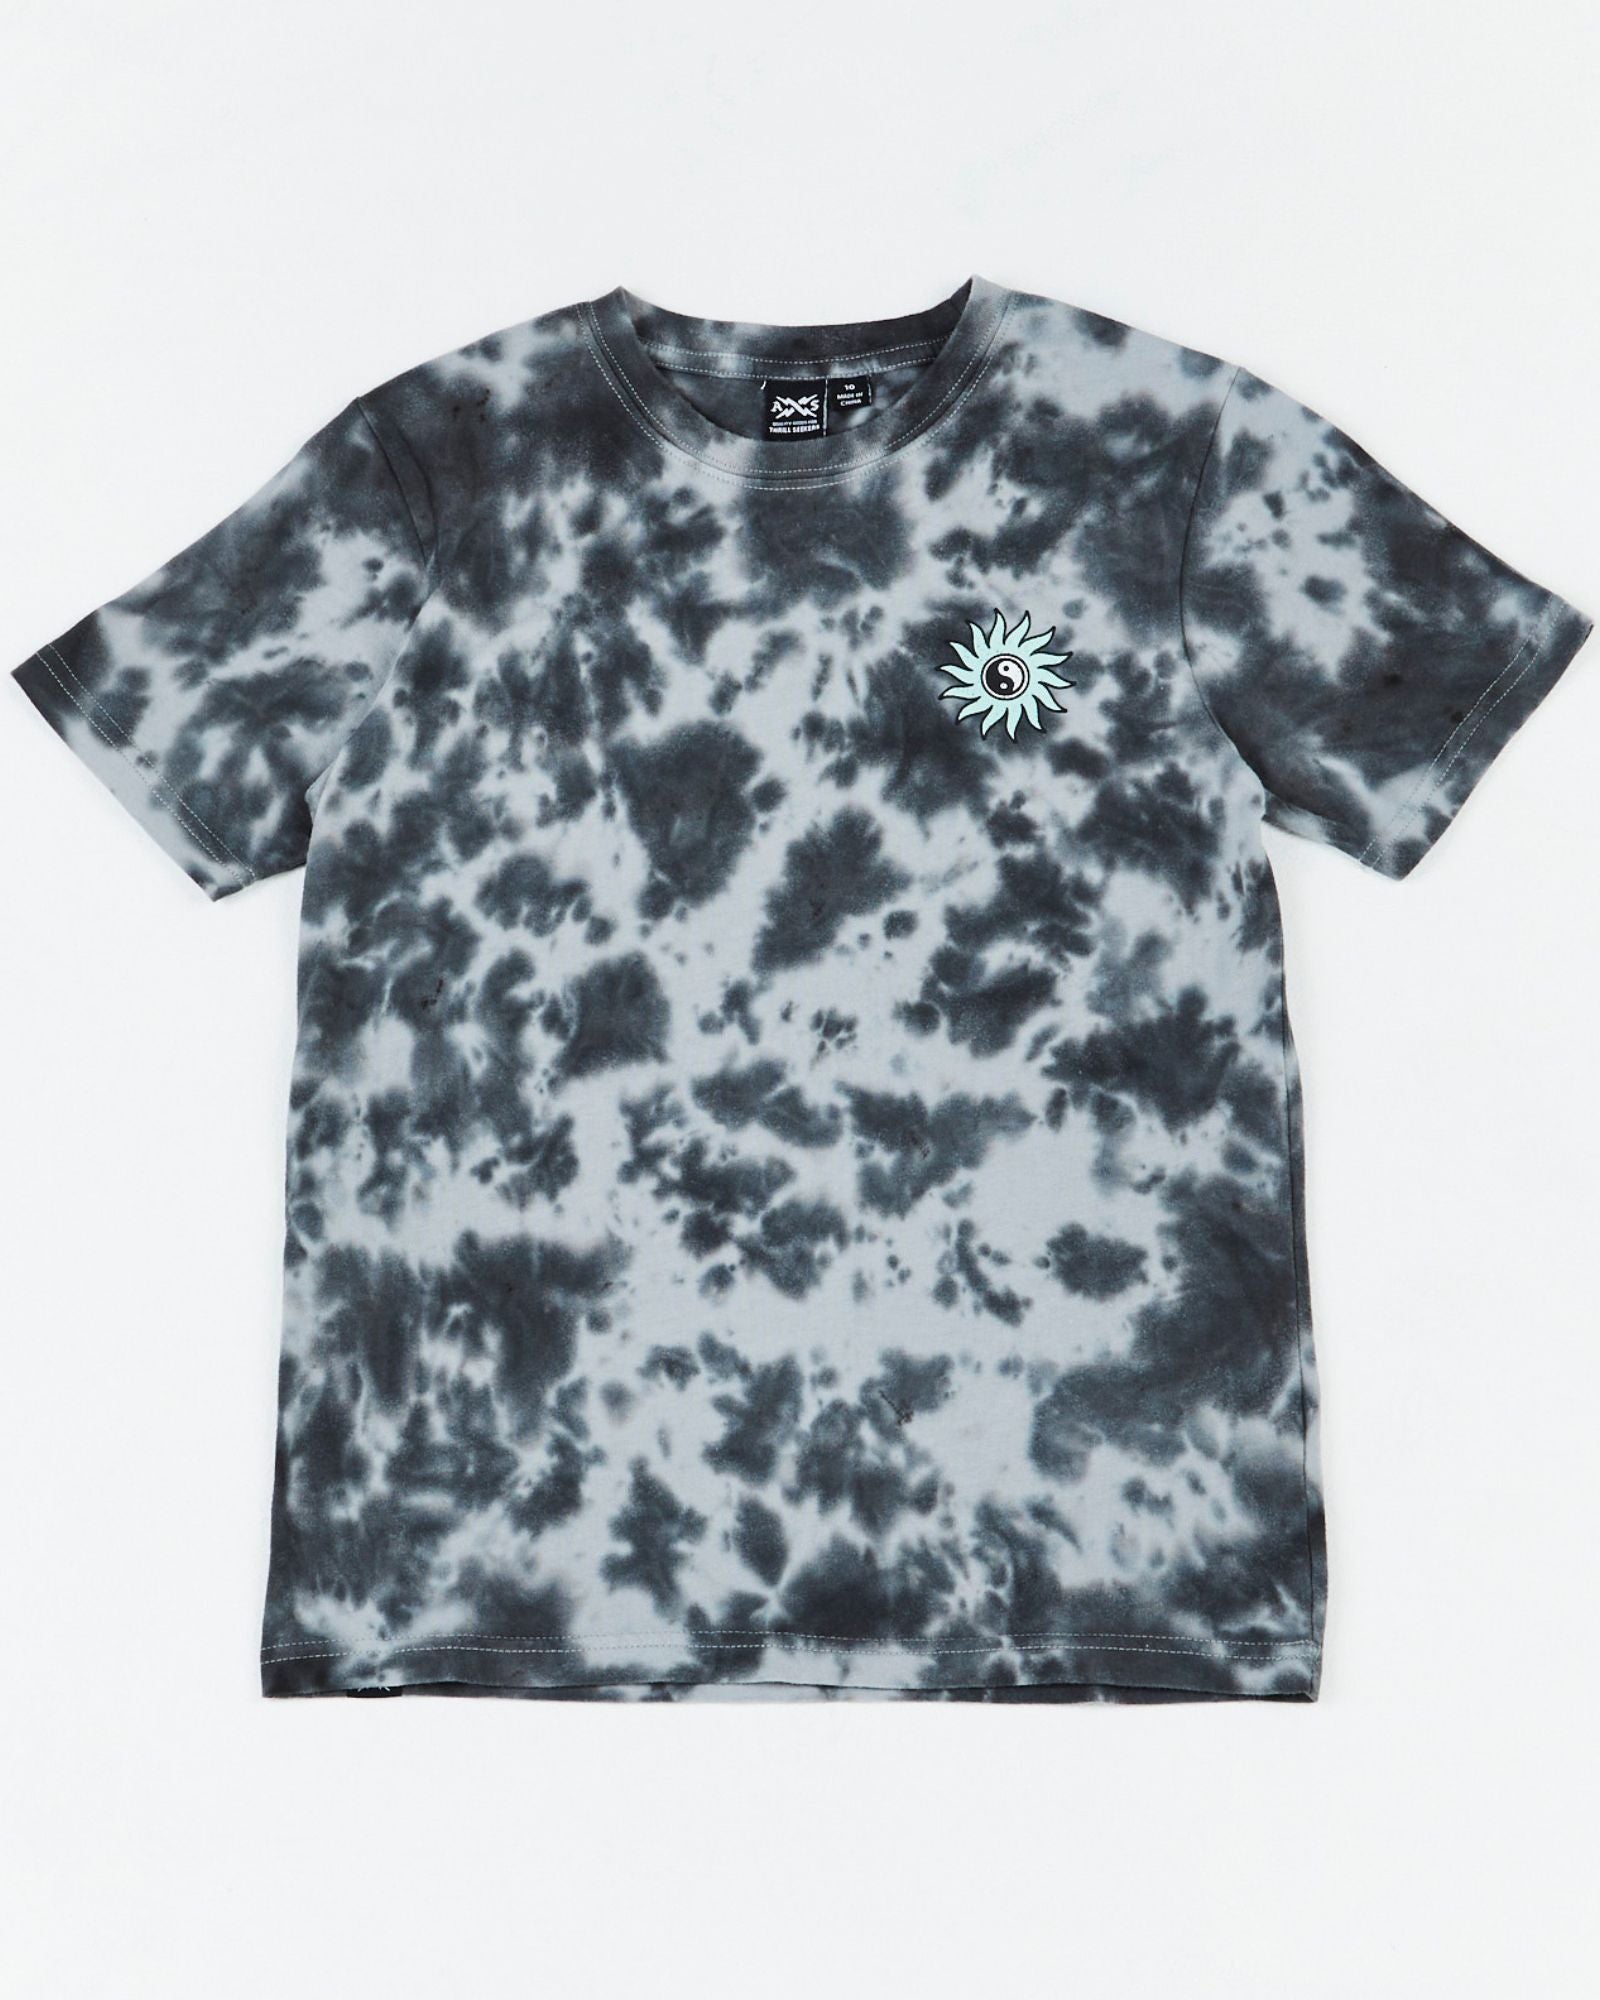 Kids Sunshine Club Tee by Alphabet Soup in grey tie dye colourway for boys aged 2-7. Featuring 100% cotton, short sleeves, regular fit, “Sunshine Club” prints to chest and back.